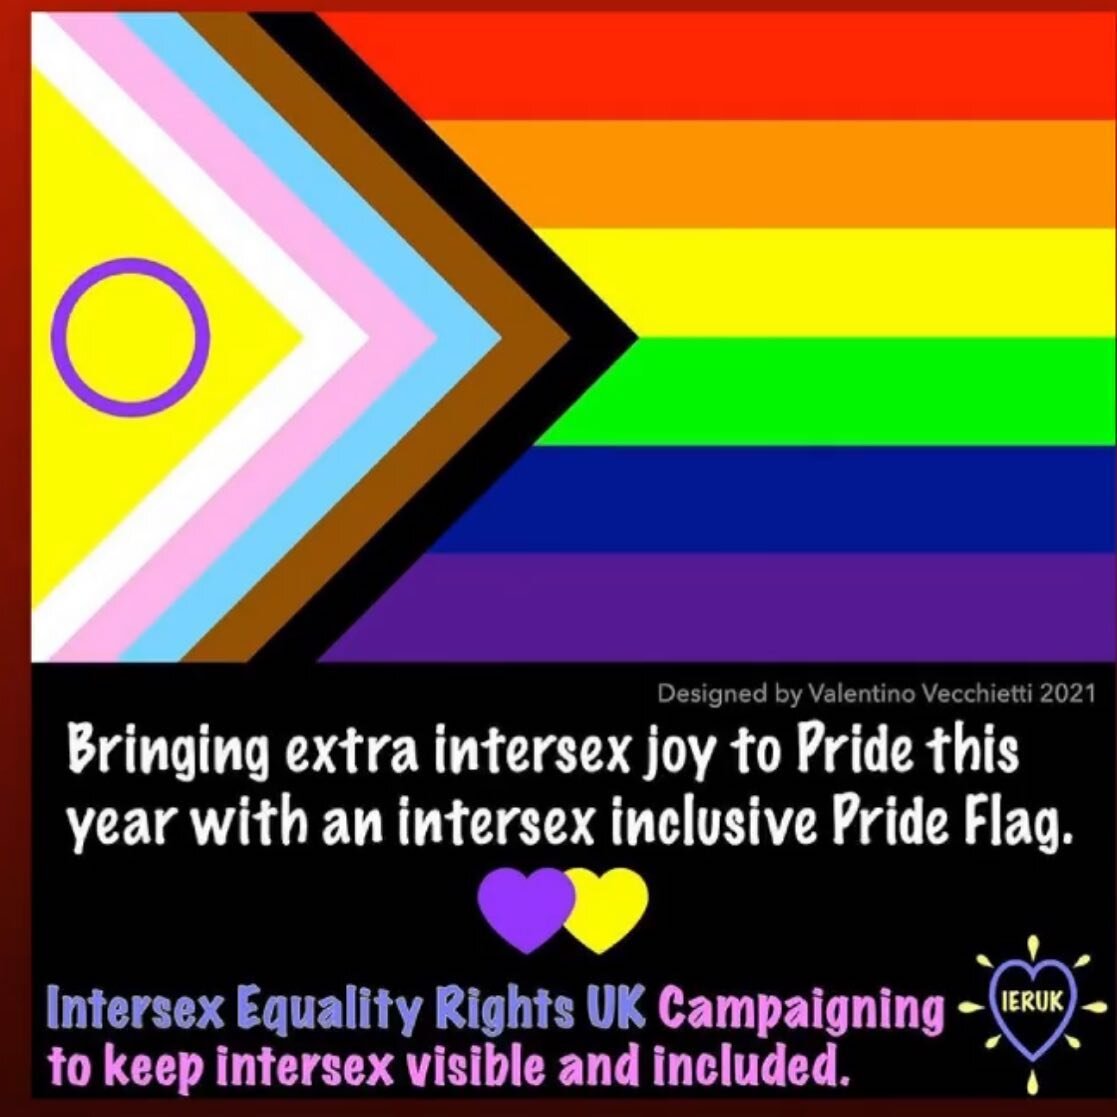 New Intersex inclusive Pride flag from @valentino_vecchietti please follow insta feed @intersex.equality.rights.uk answer survey &amp; support! #pridemonth #pride🌈 #pride2021 #intersexpride #intersexisbeautiful